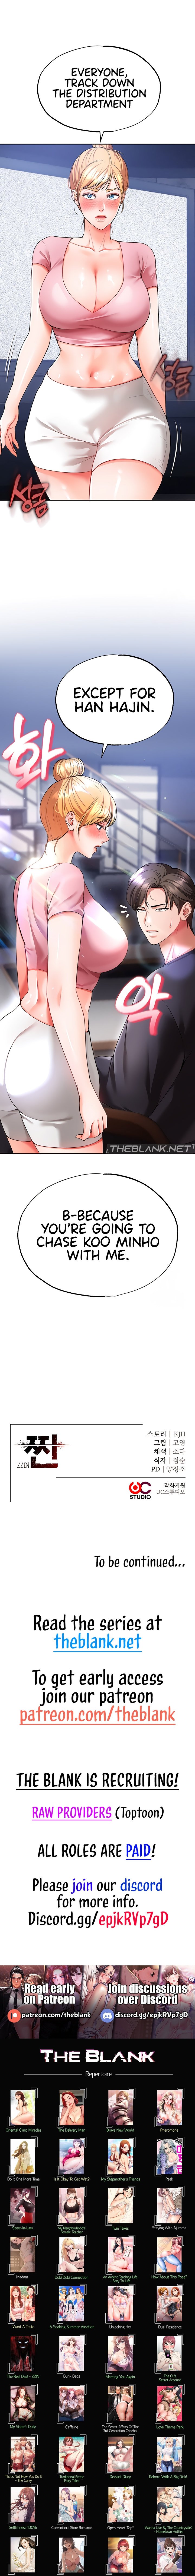 the-real-deal-chap-39-14